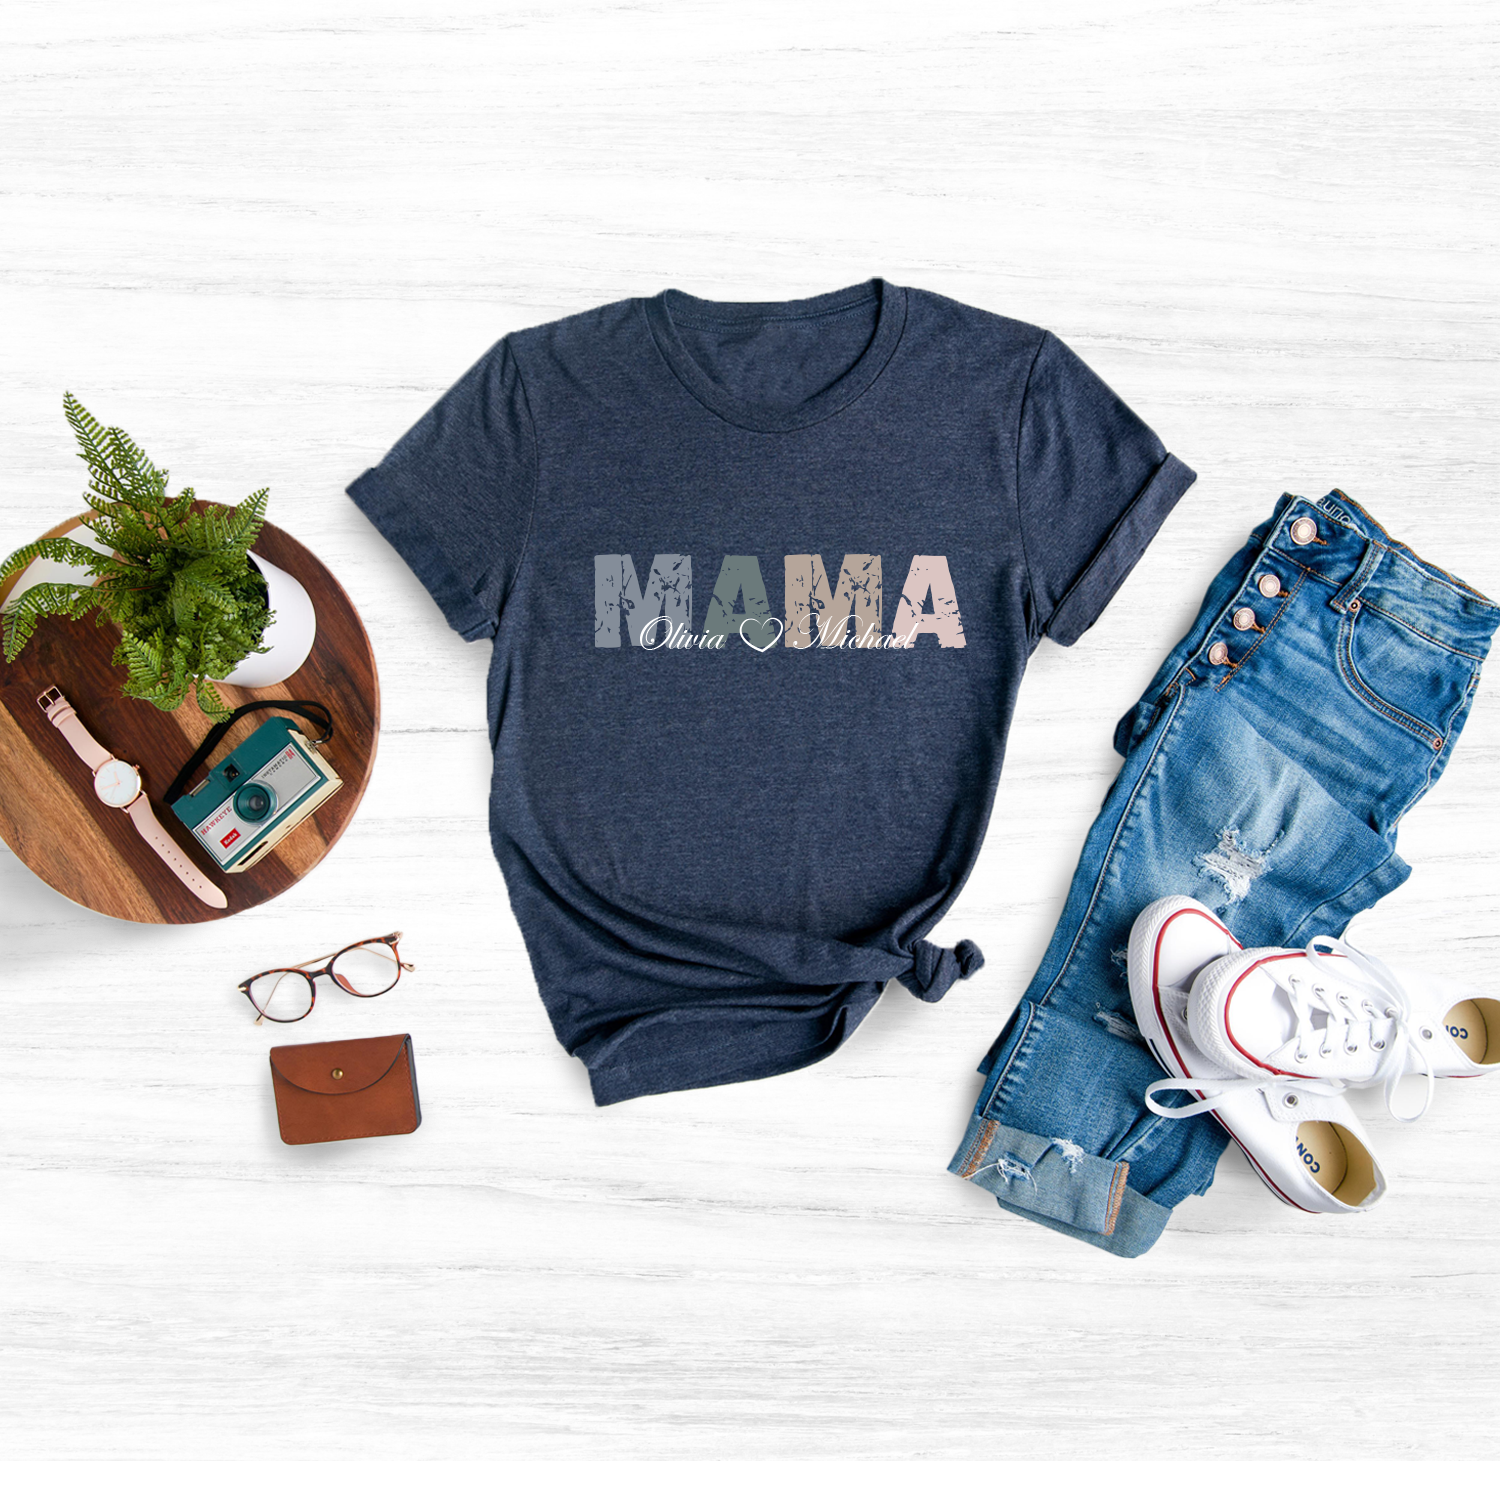 Custom Mama Shirt: Celebrating the unique bond between mothers and their children.